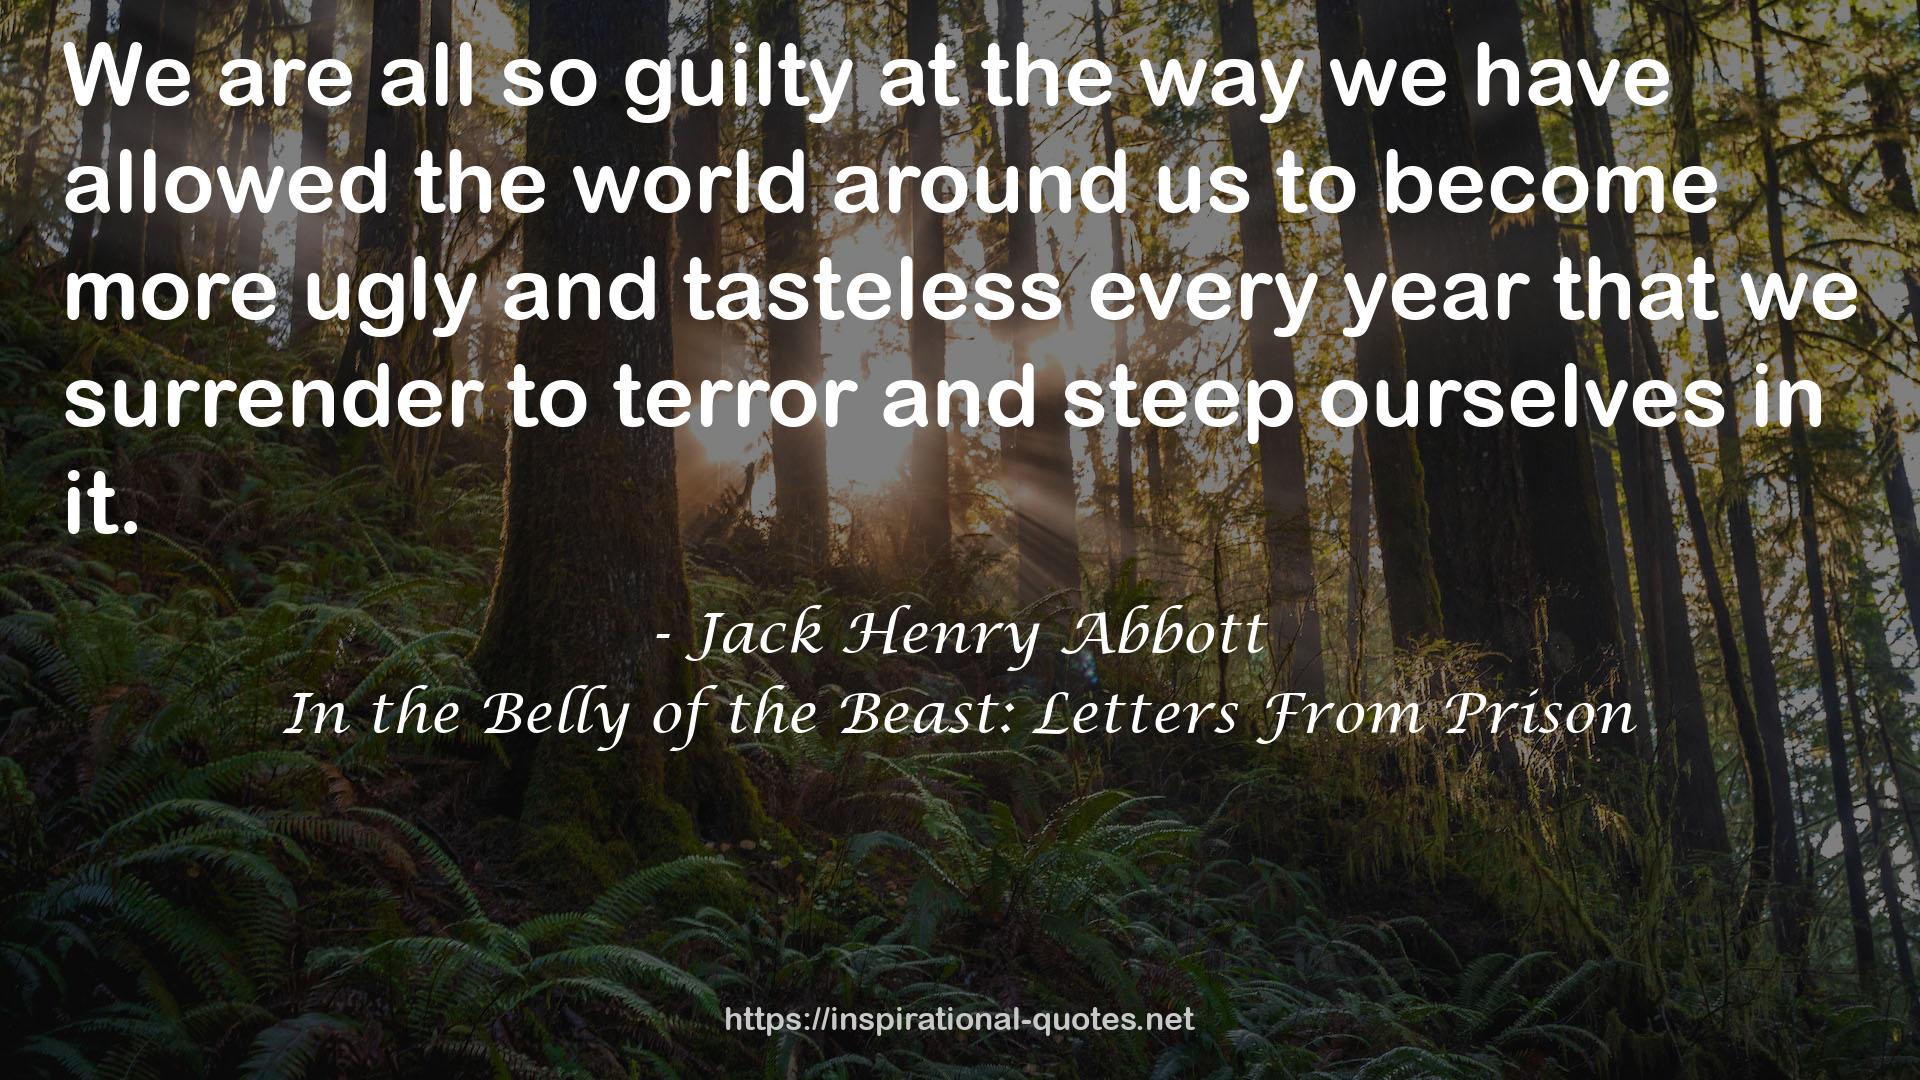 In the Belly of the Beast: Letters From Prison QUOTES